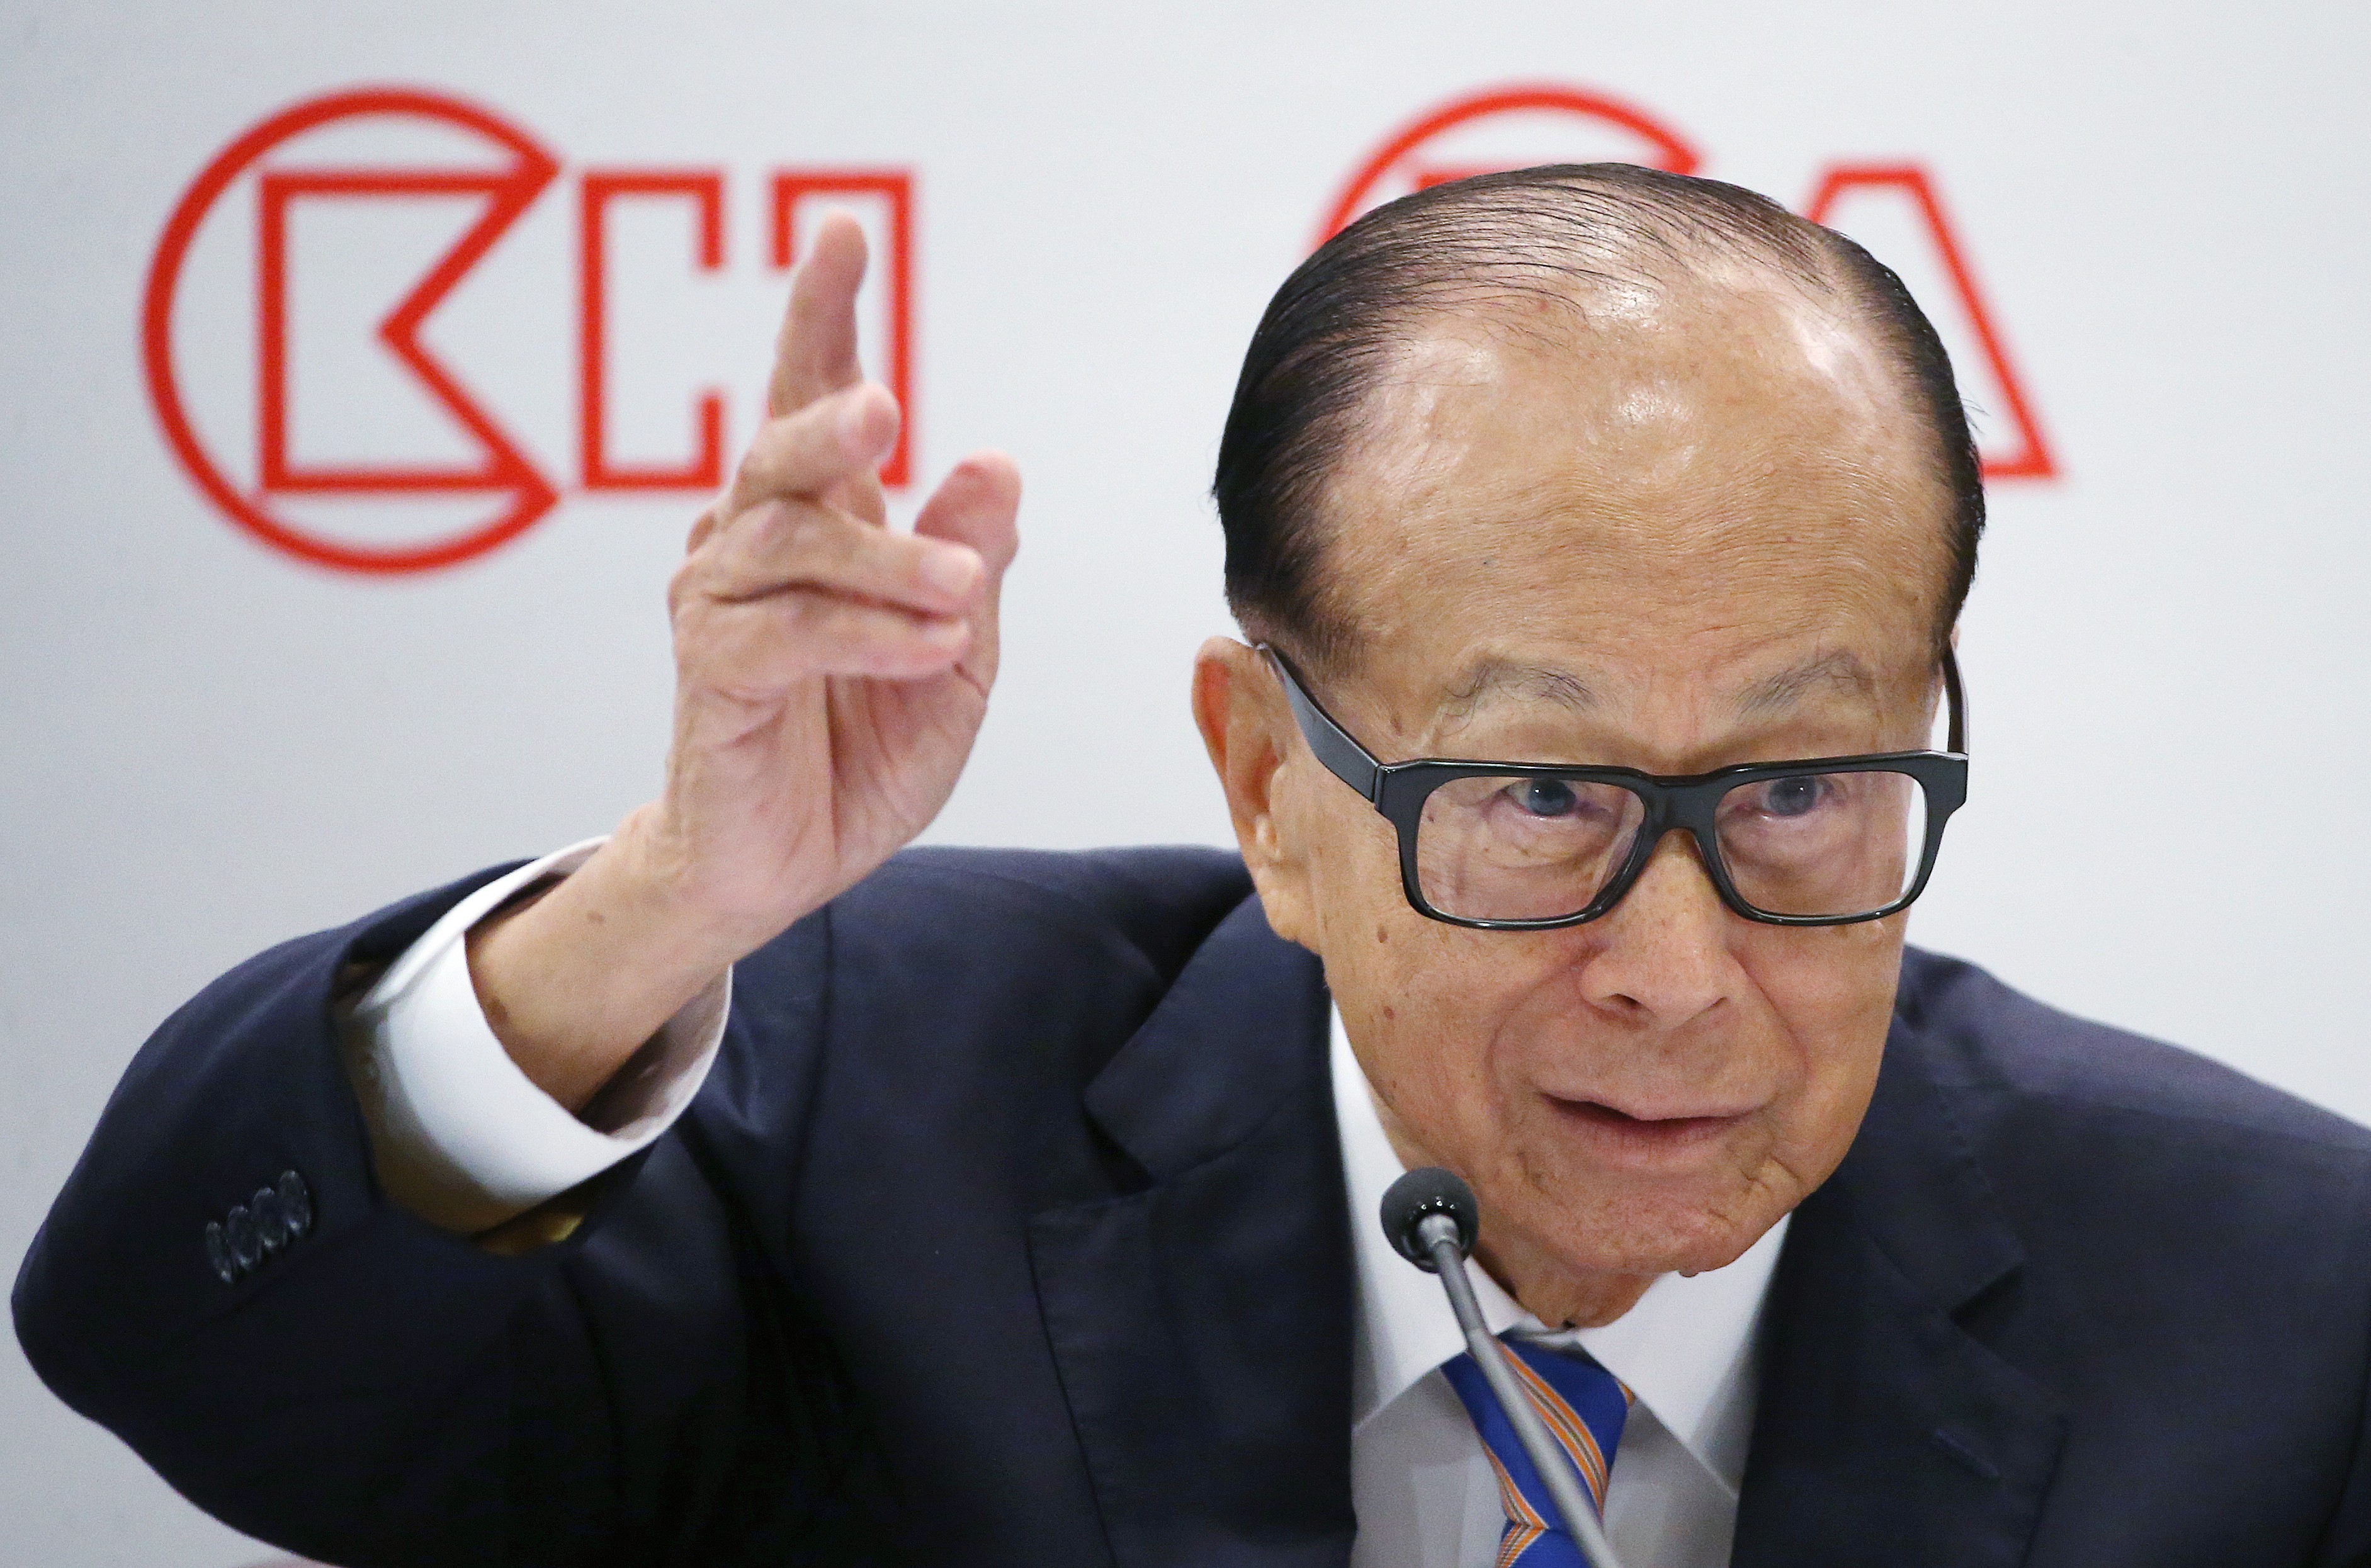 CK Hutchison Holdings, once run by Hong Kong tycoon Li Ka-shing, is among the firms to be named and shamed in the report. Photo: Sam Tsang